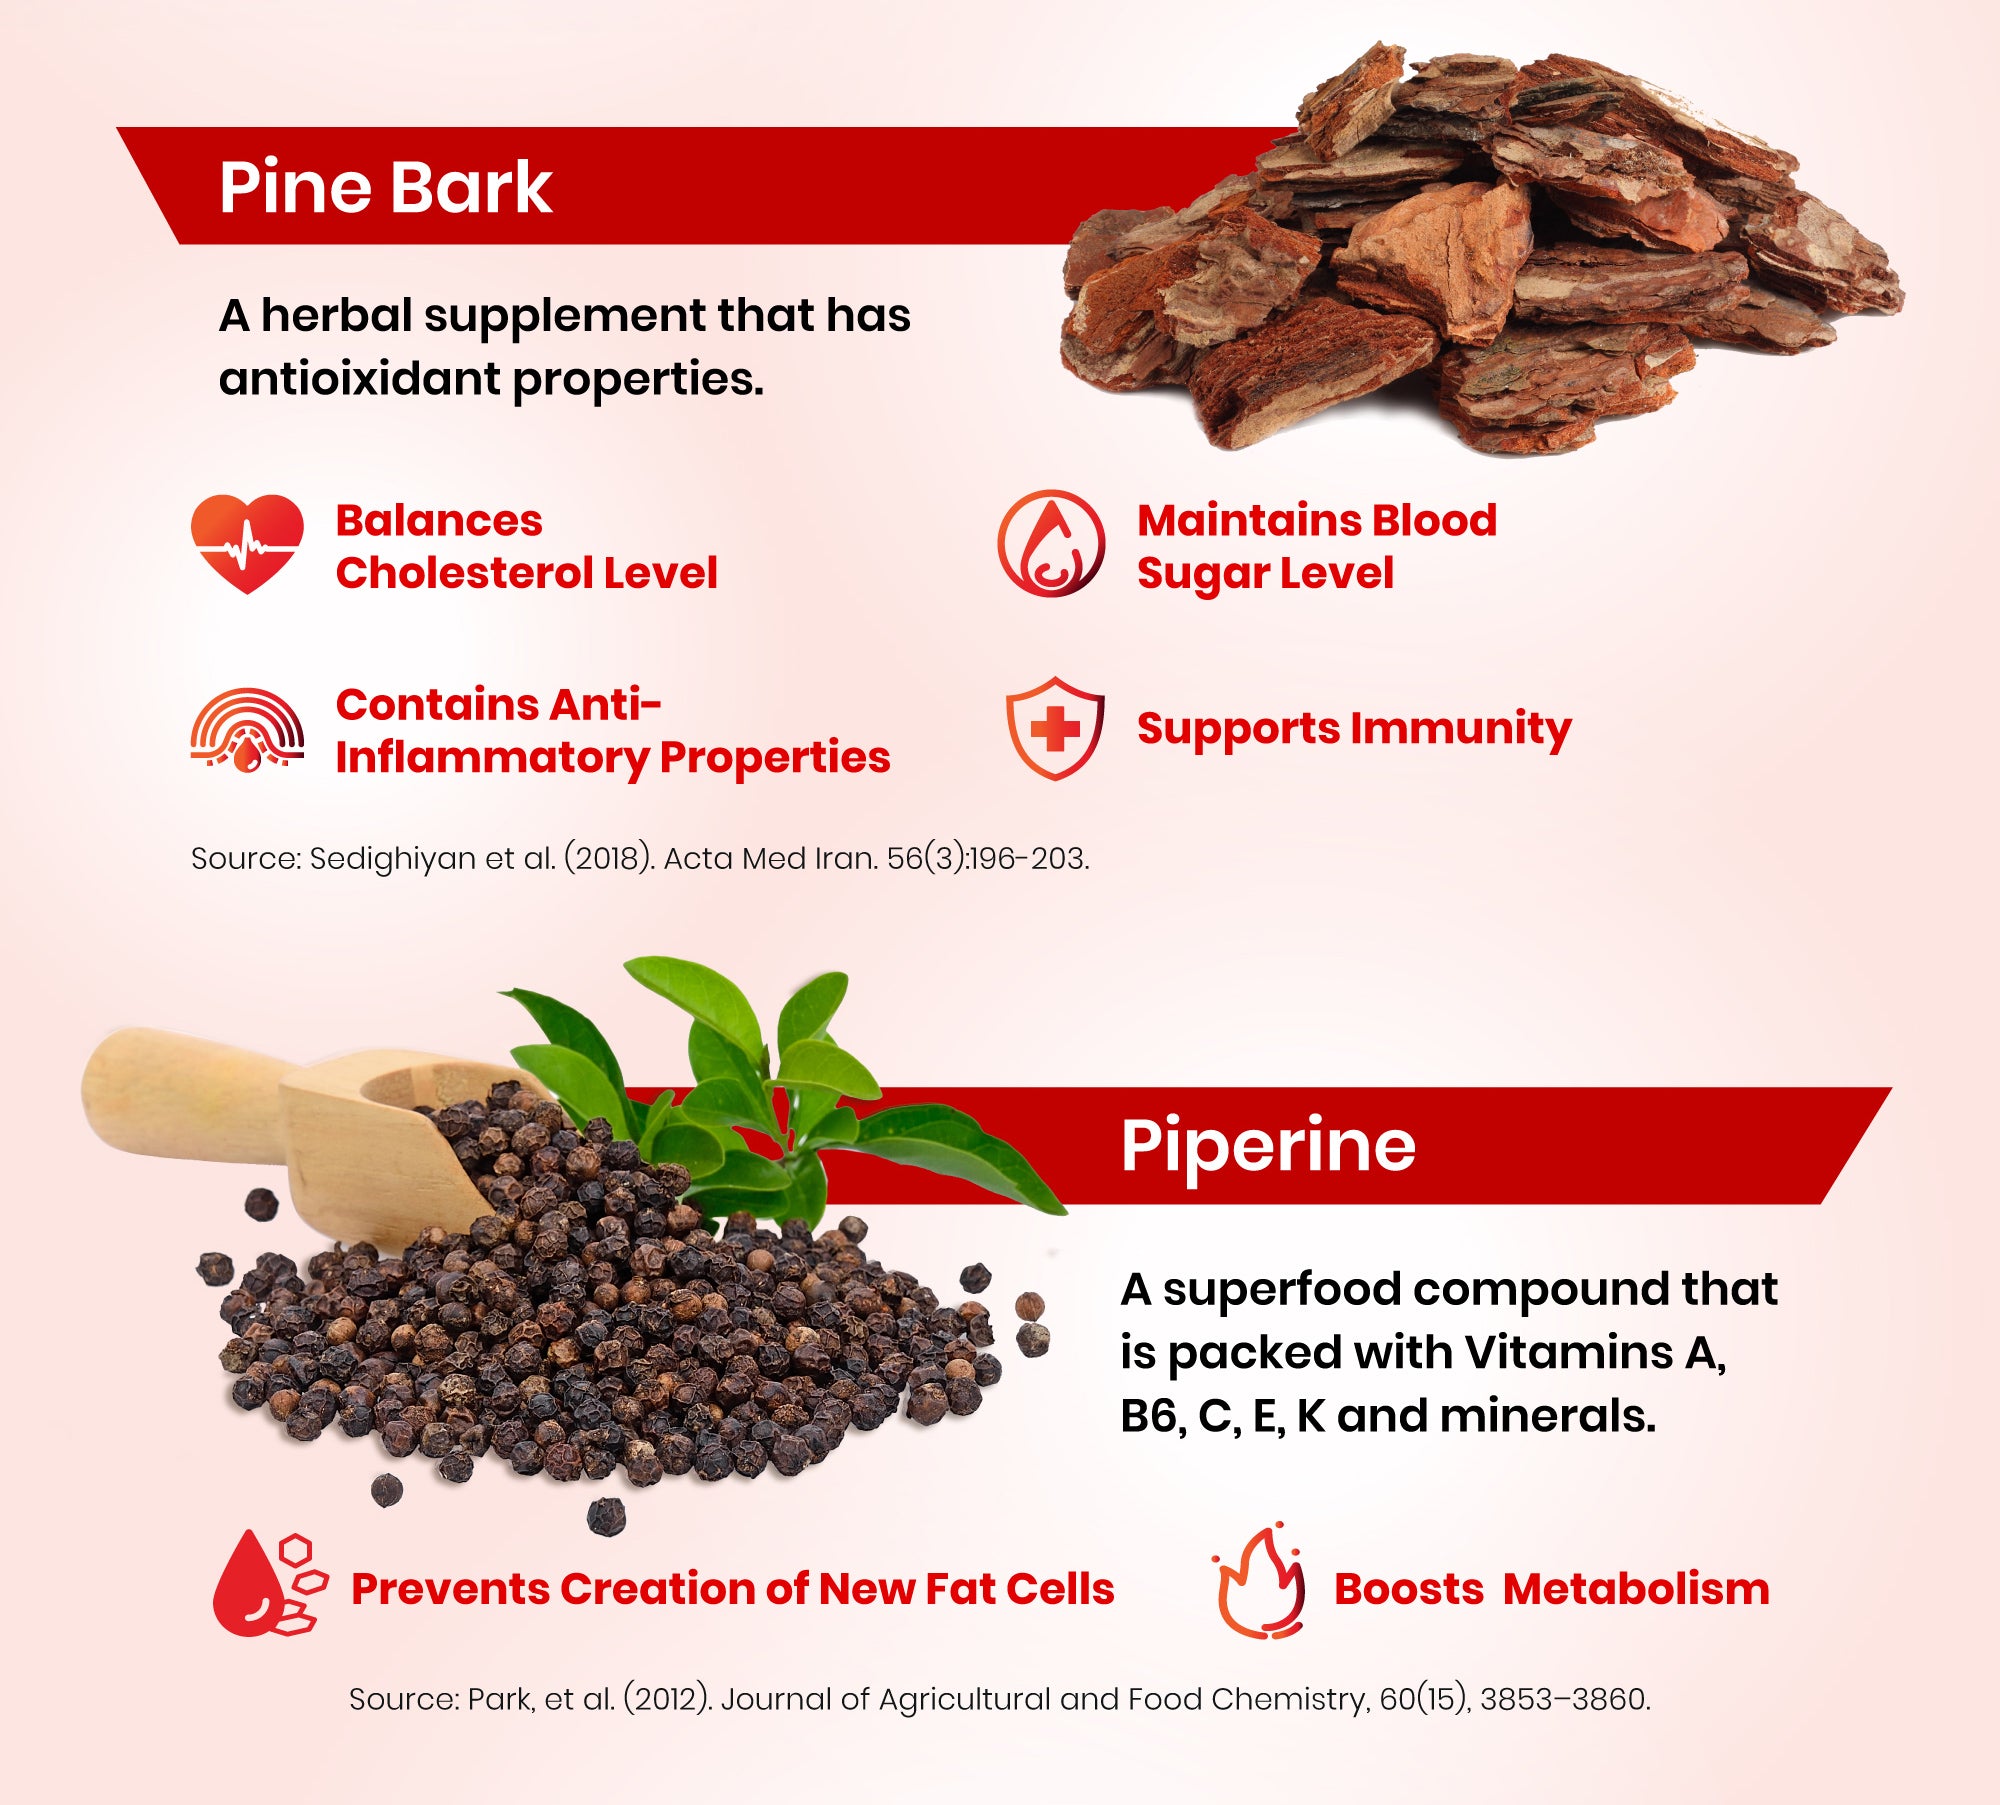 Pine bark, an herbal supplement that contains antioxidant and anti-inflammatory properties. Also, Piperine, a superfood that is packed with vitamins A, B6, C, E, K, and minerals for inhibiting the creation of new fat cells.